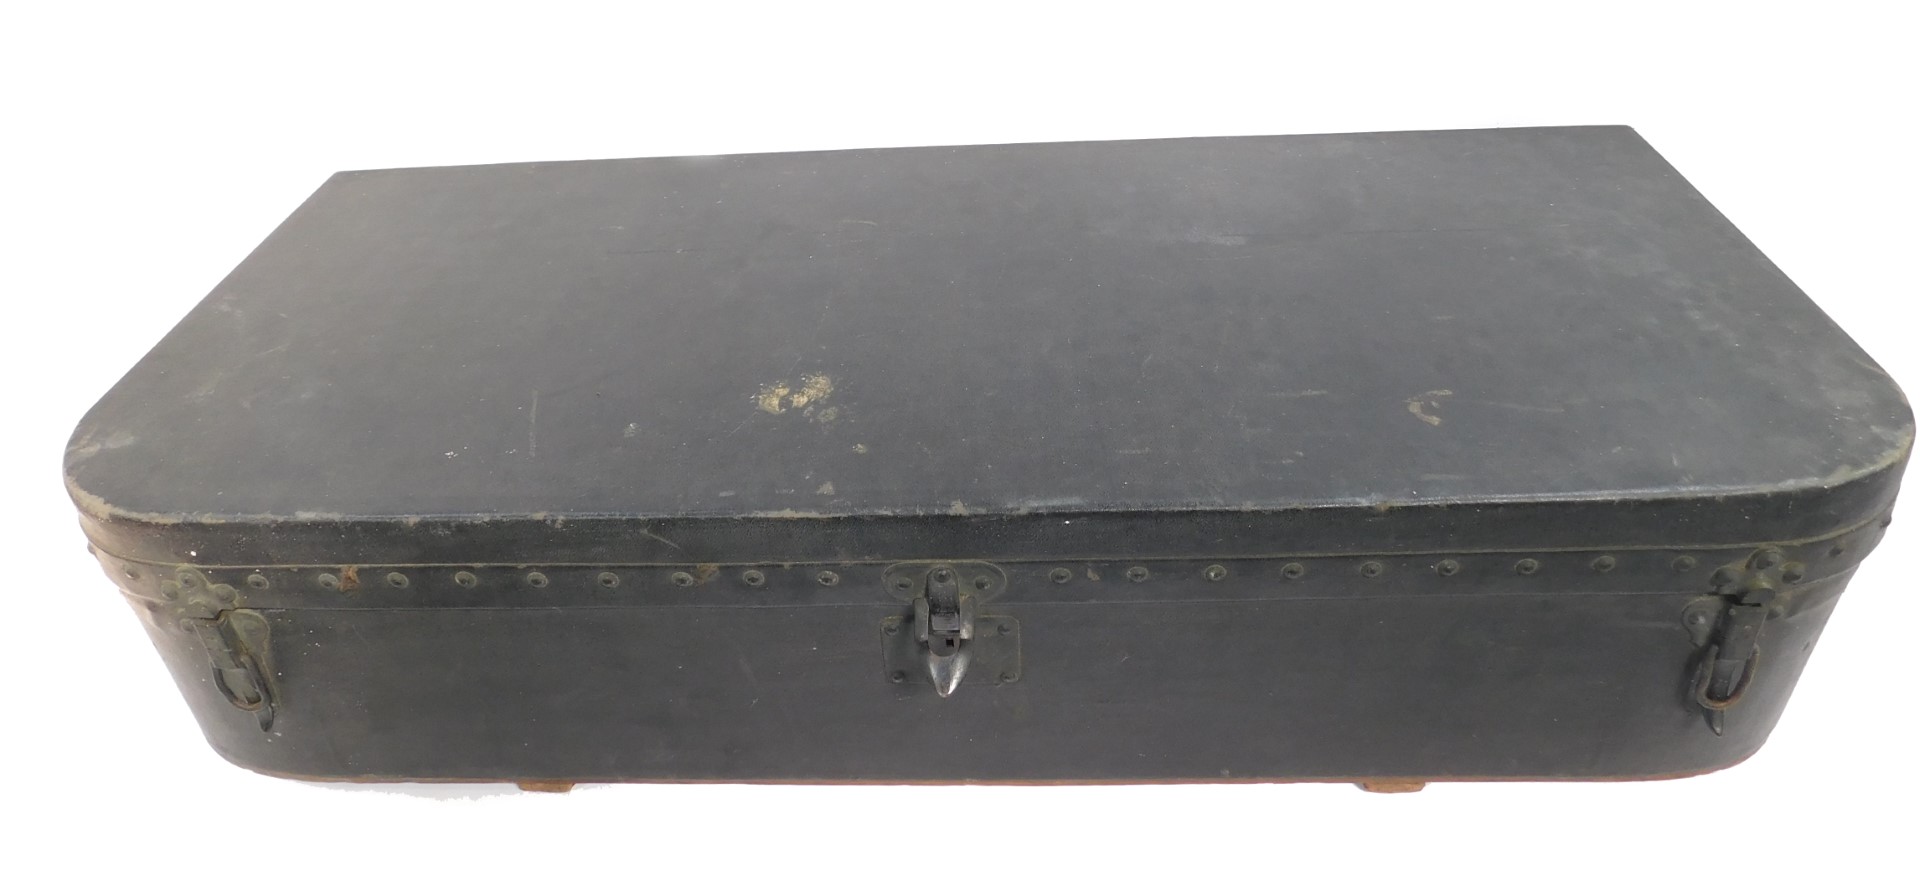 A Louis Vuitton early 20thC car trunk, possibly for a Rolls Royce, the studded black bow fronted